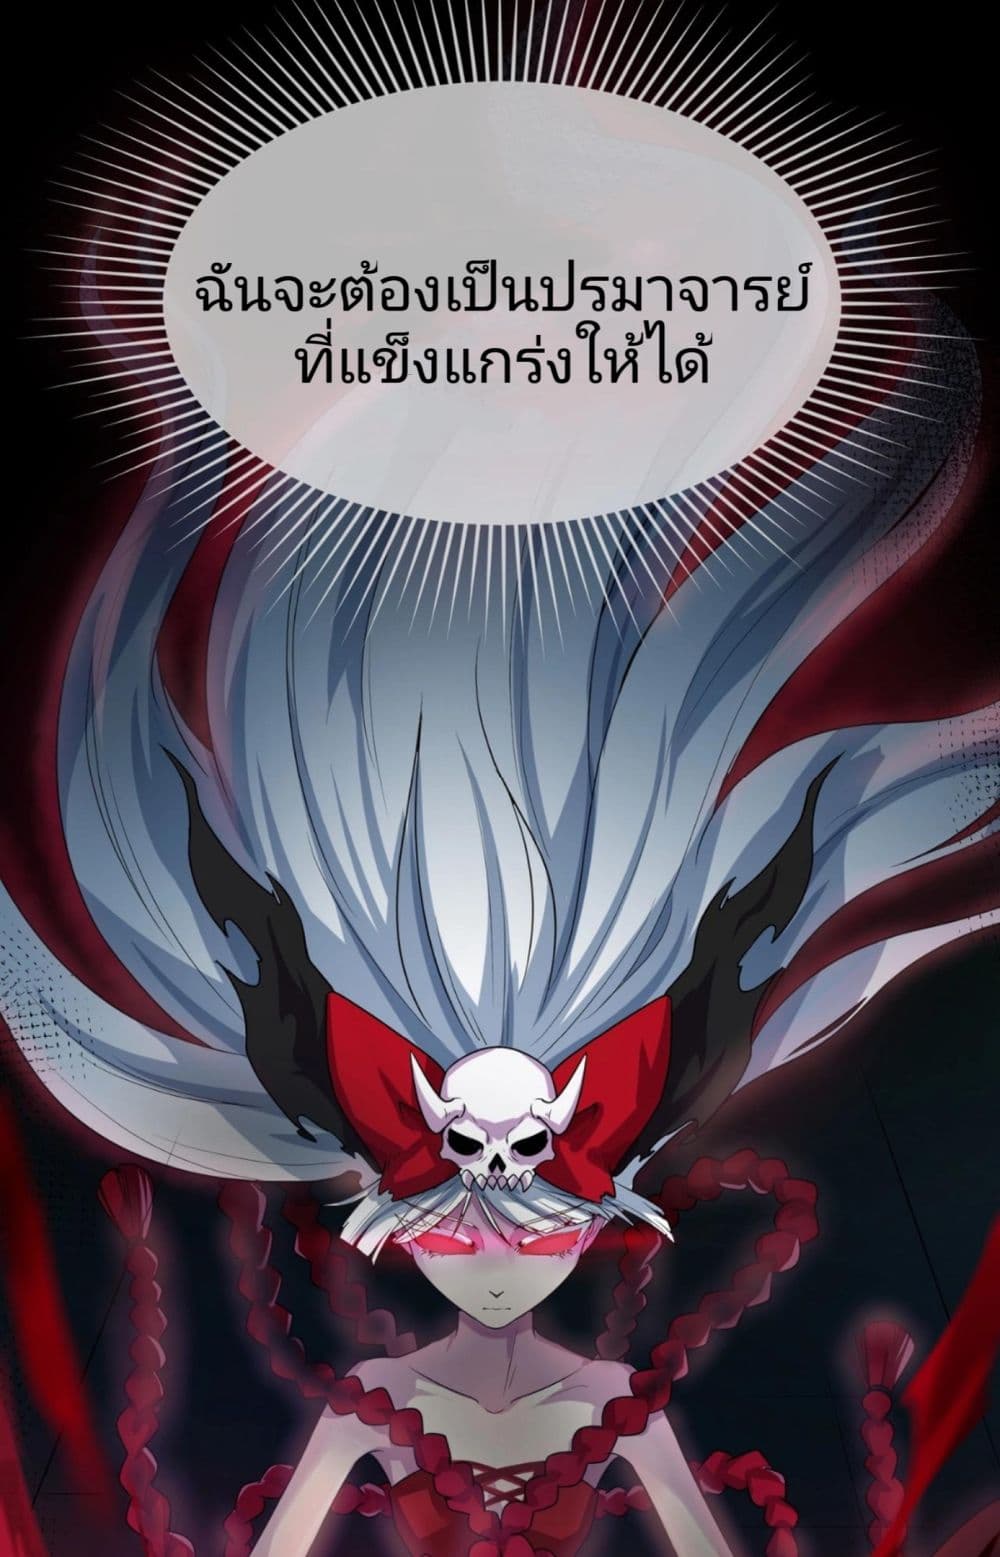 The Age of Ghost Spirits à¸à¸­à¸à¸à¸µà¹ 2 (40)